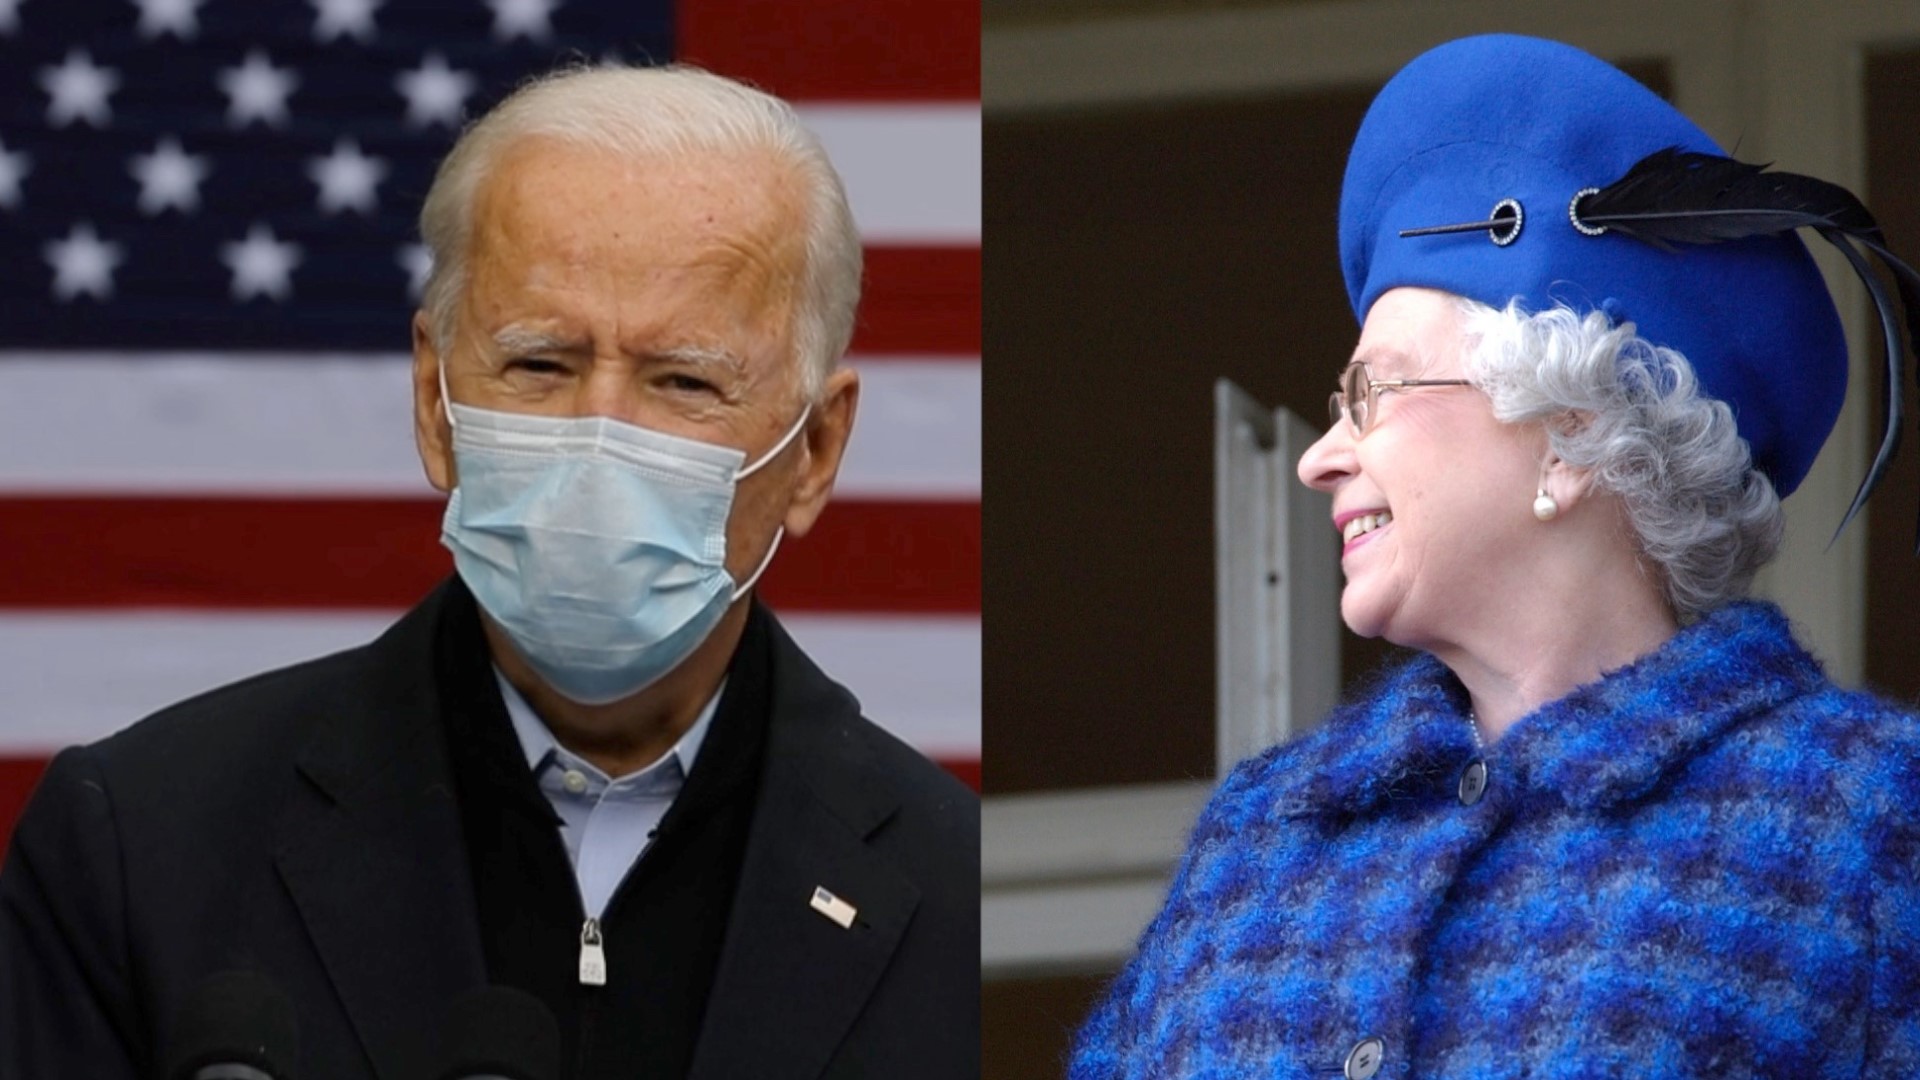 The anticipated meeting between President Joe Biden and the Queen appears just around the corner. Veuer's Chloe Hurst has the story!